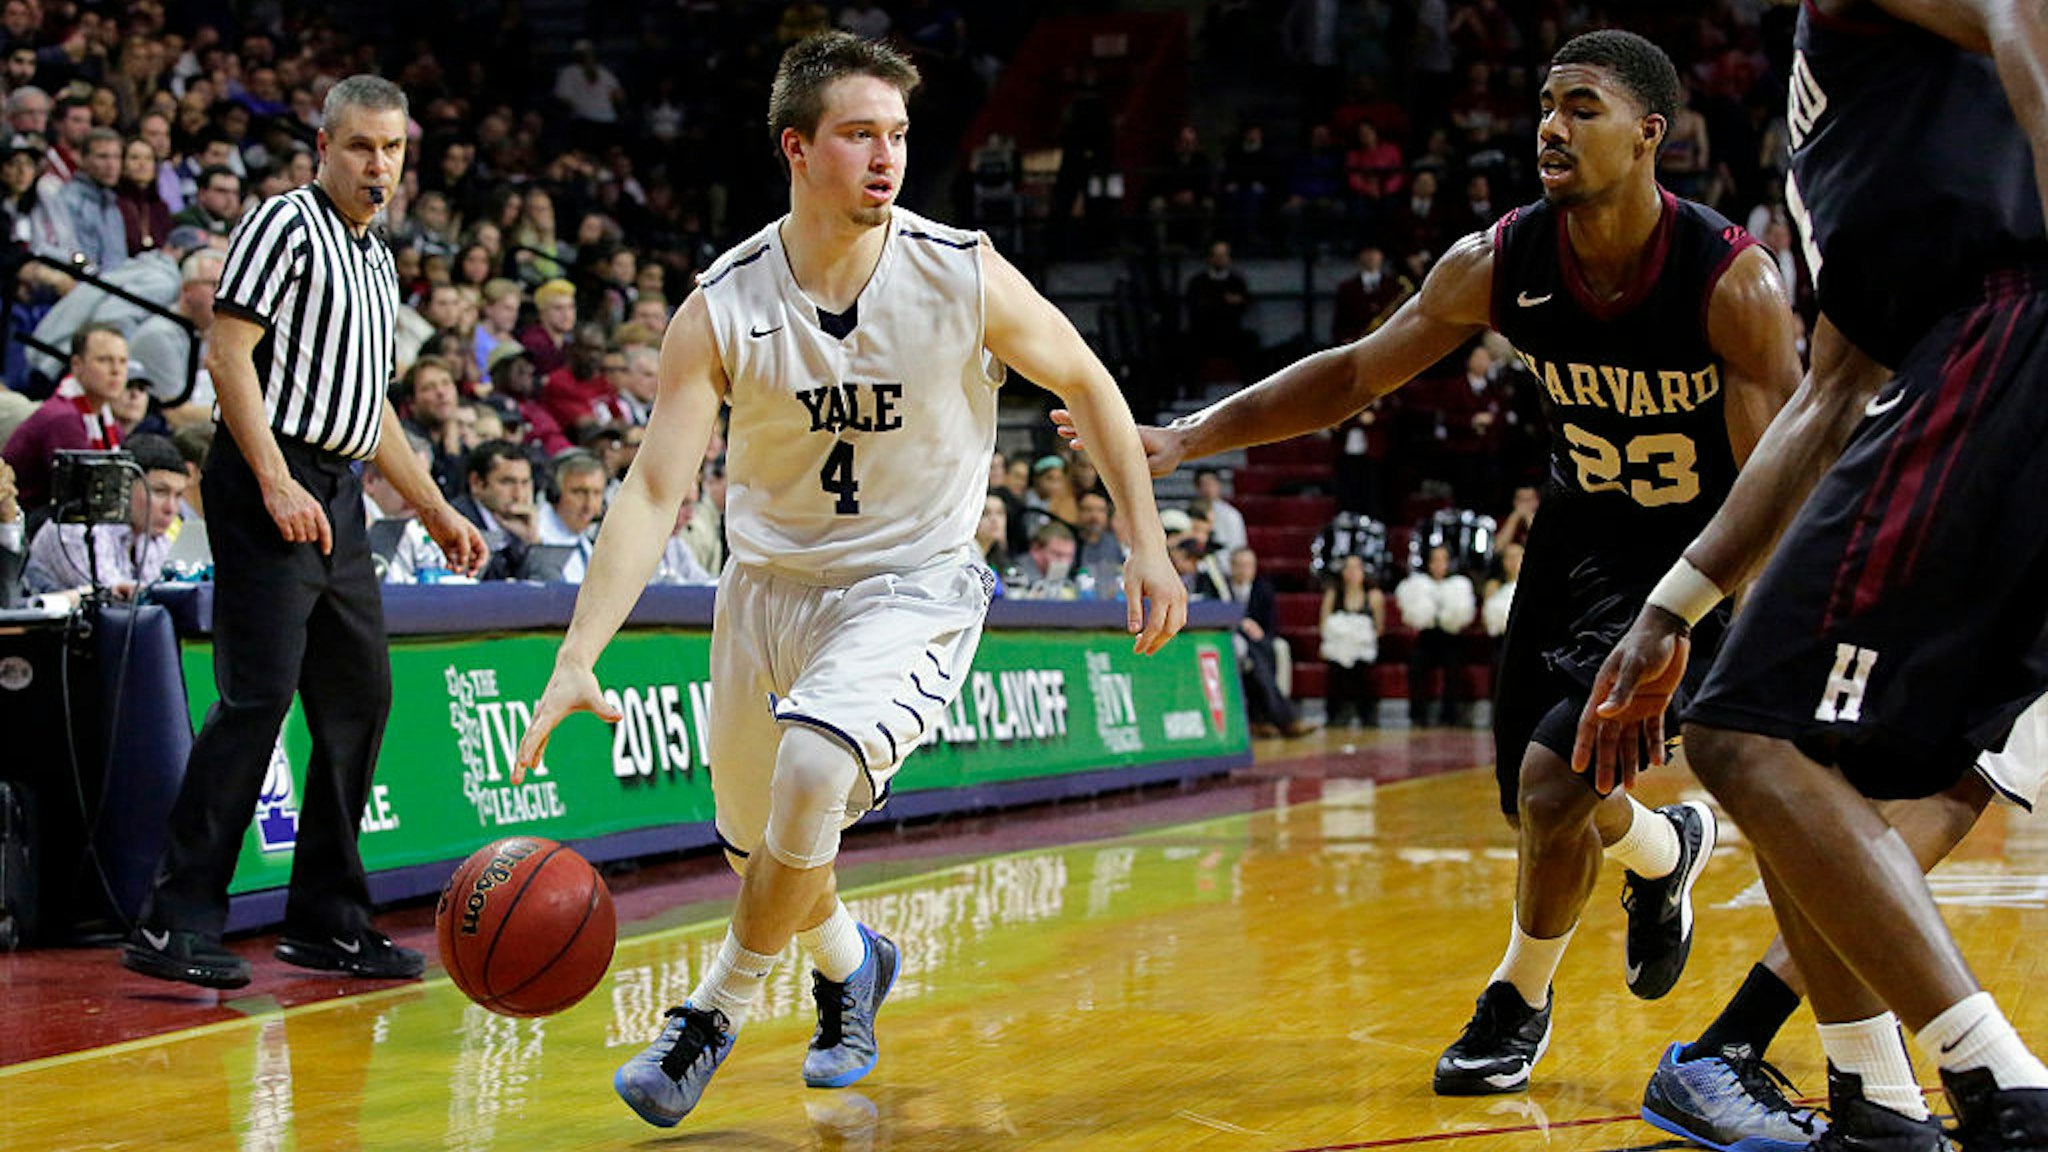 Jack Montague #4 of the Yale Bulldogs during a game against the Harvard Crimson at the Palestra on the campus of the University of Pennsylvania on March 14, 2015 in Philadelphia, Pennsylvania.